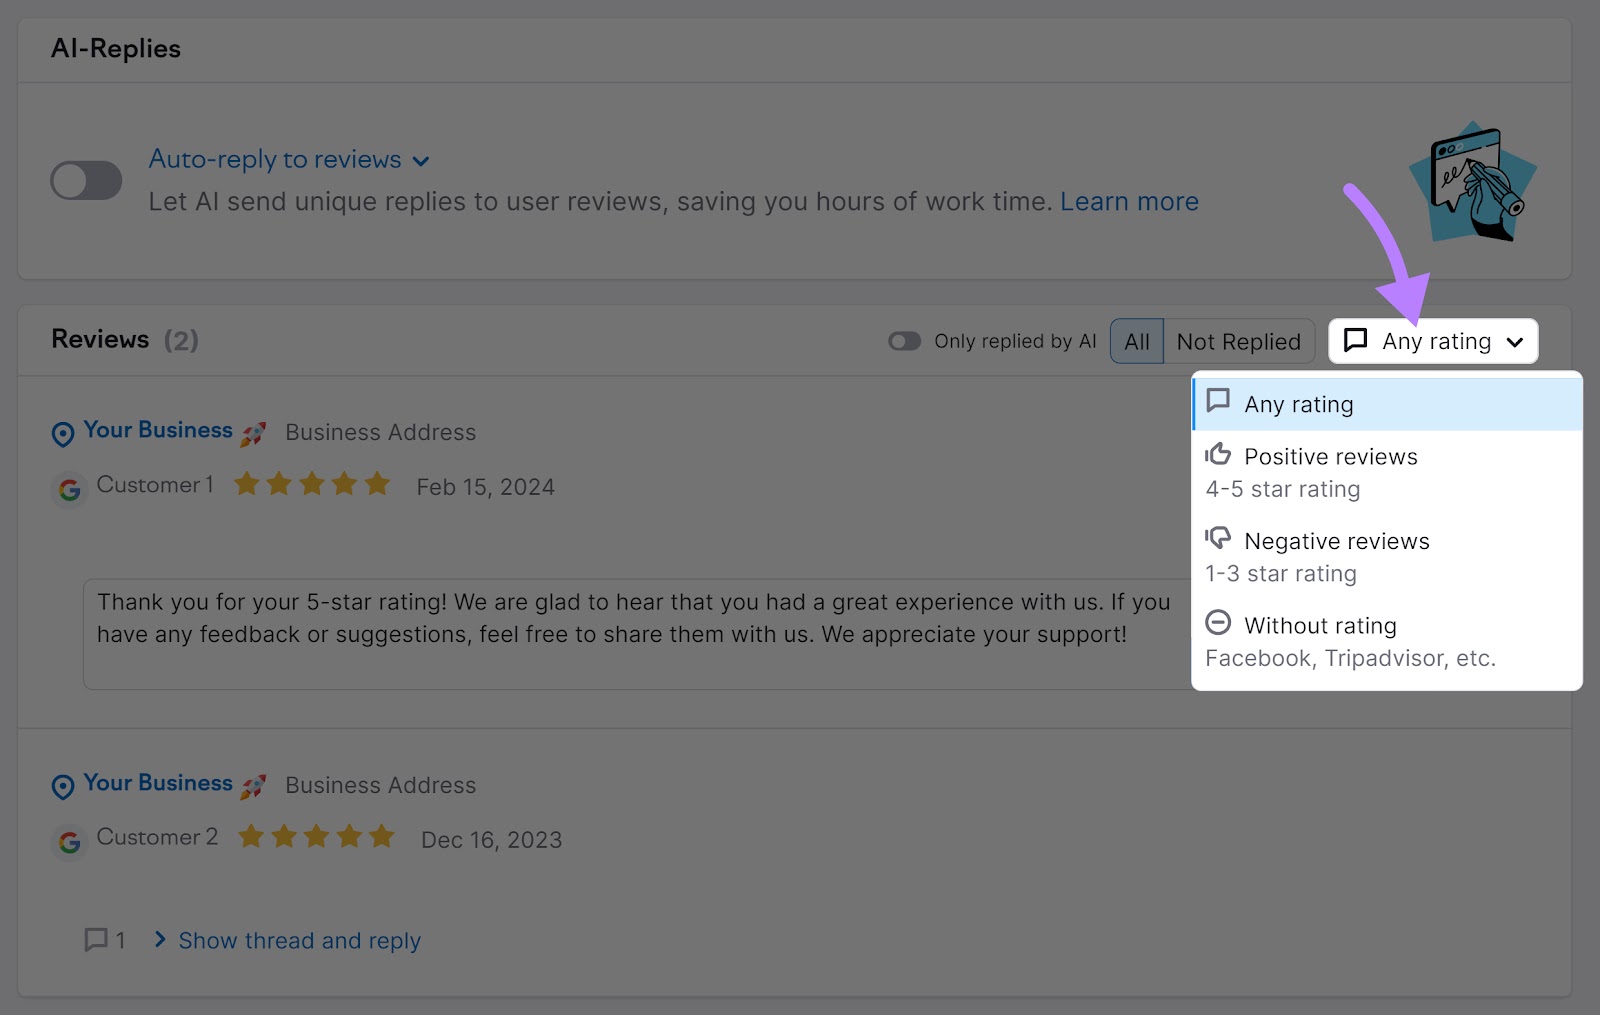 Reviews section of the "Review Management" tool highlighting the rating filter options.